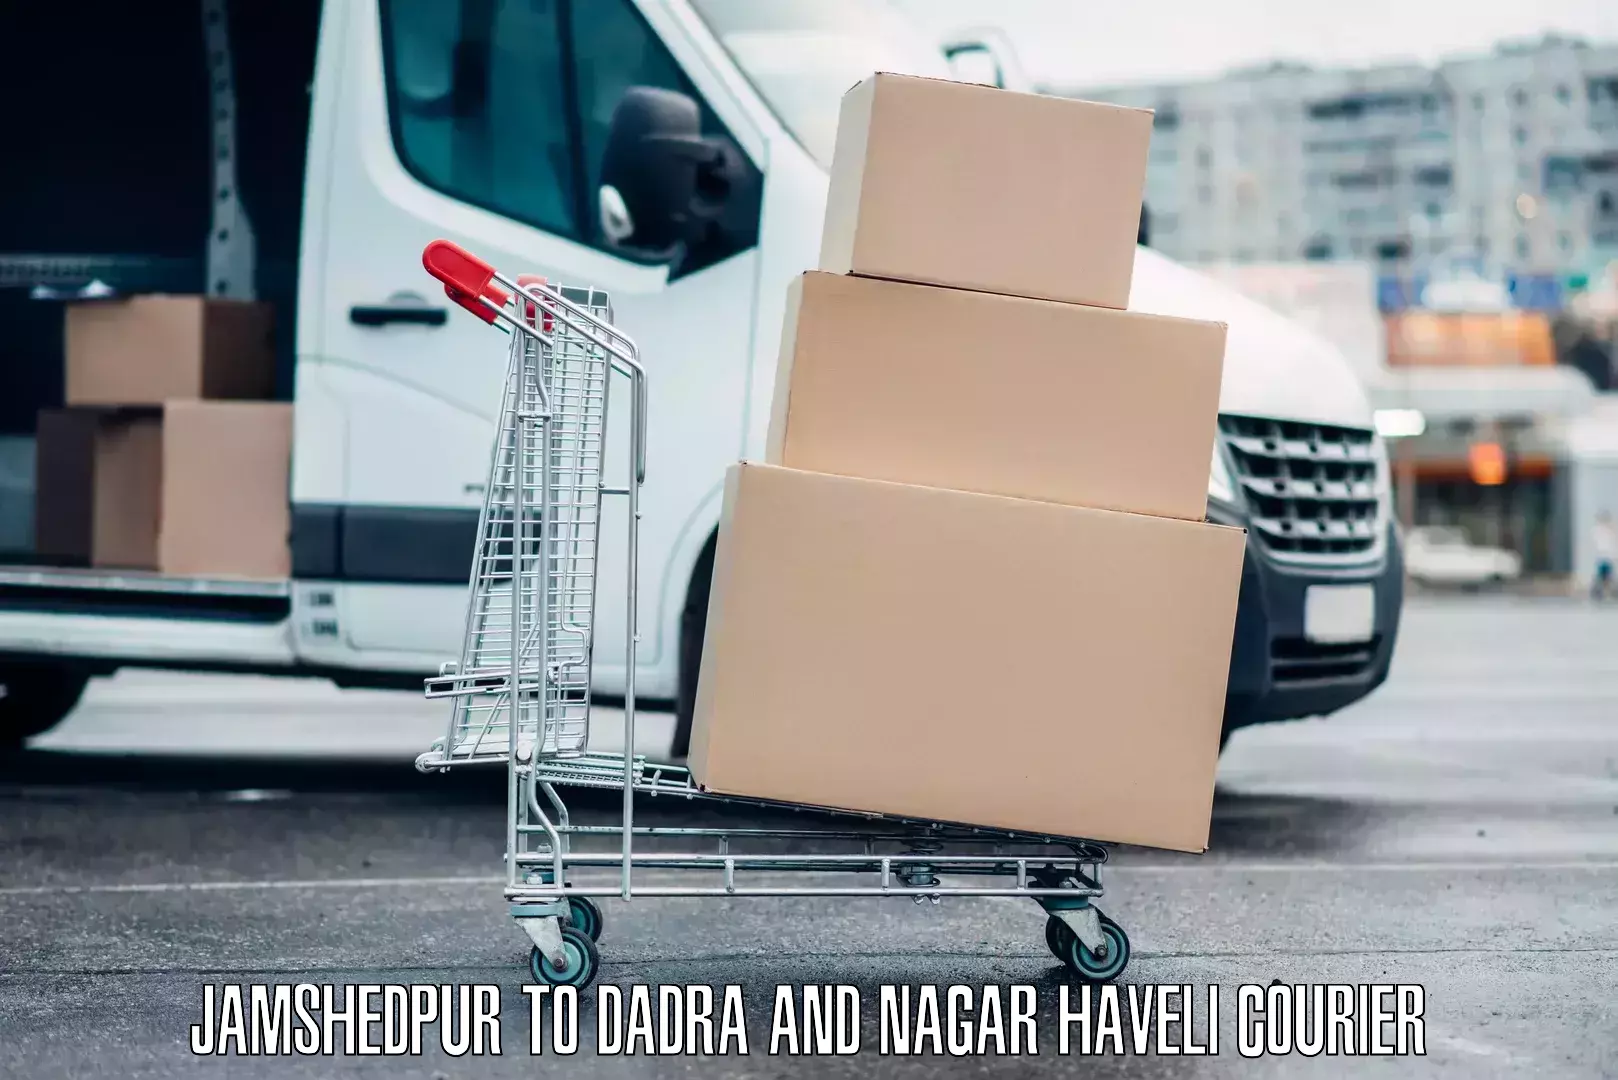 Luggage shipping specialists Jamshedpur to Dadra and Nagar Haveli